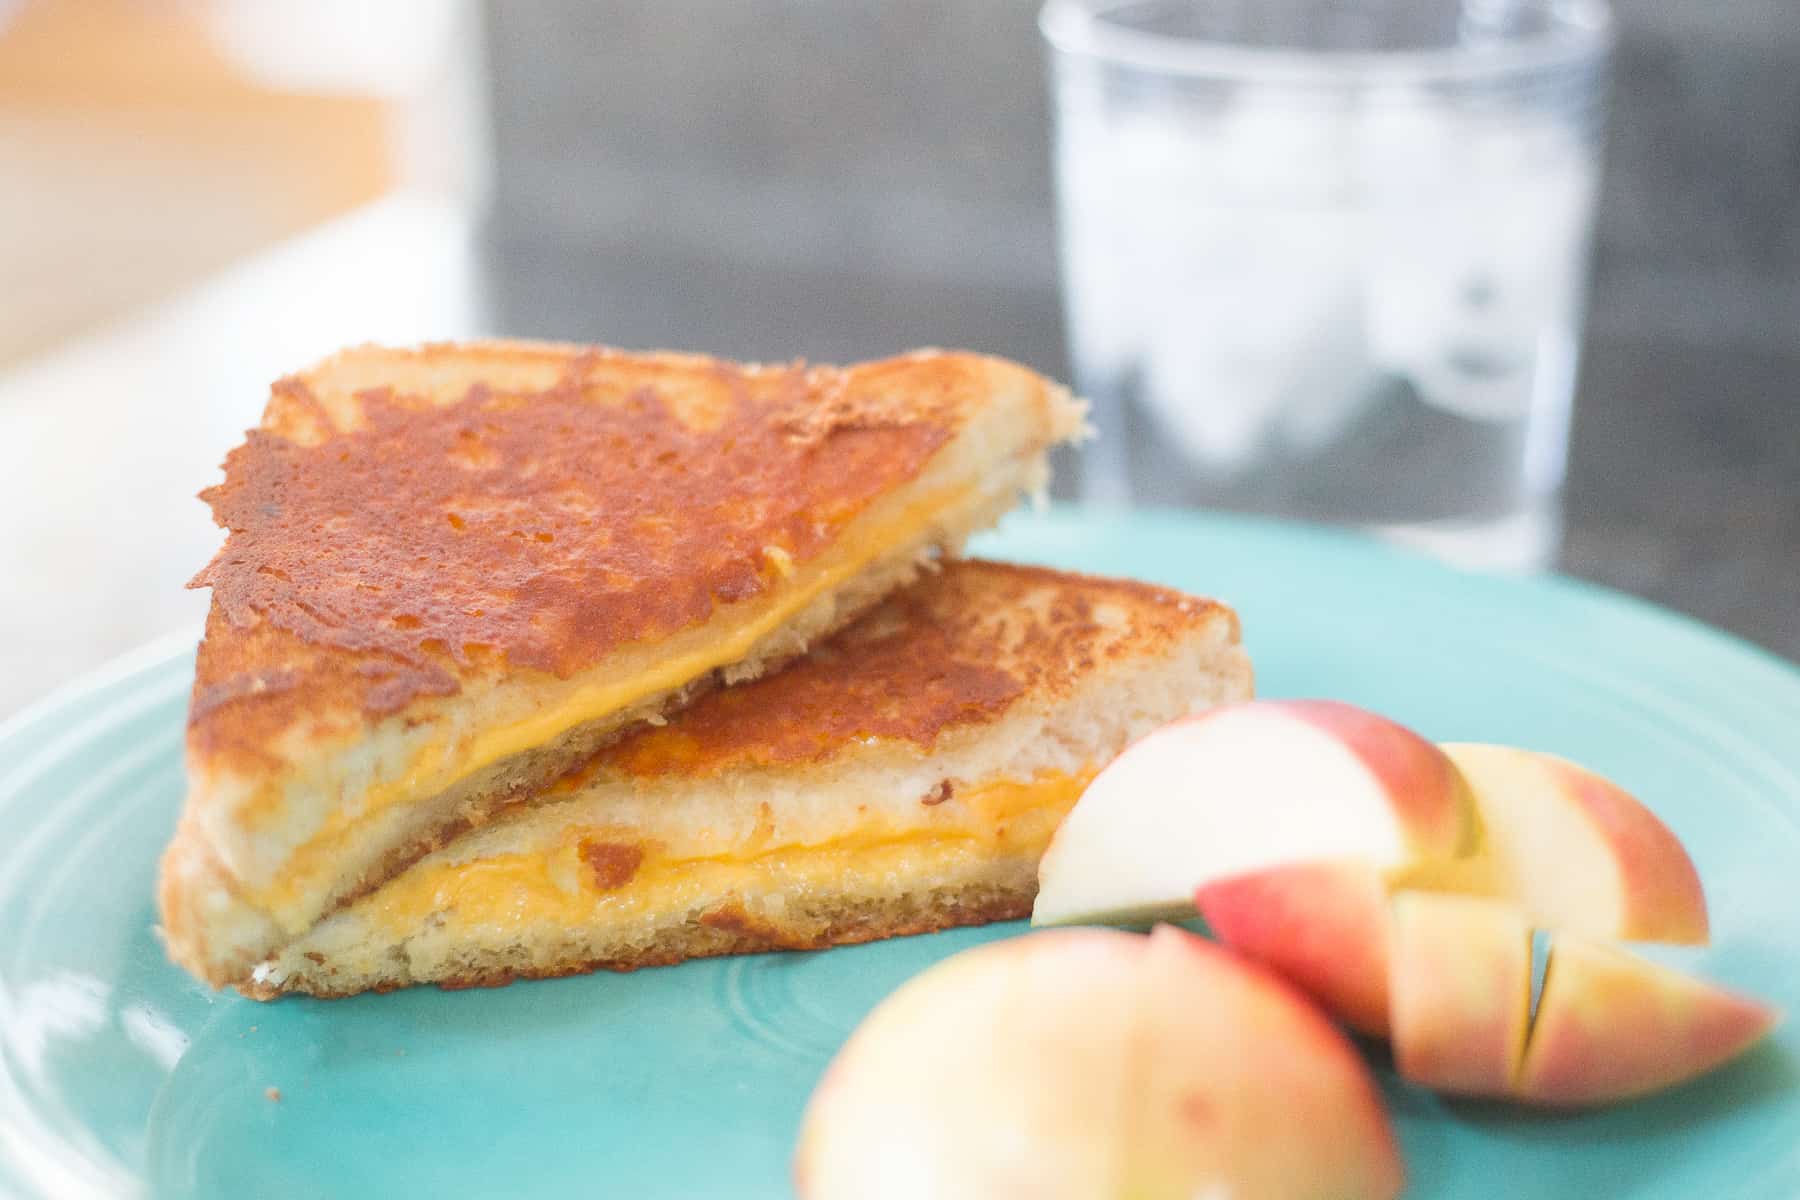 I'm going to be blunt, you're making grilled cheese sandwiches all wrong and you need to stop. Once you've gone Inside-Out, you'll never go back to a standard grilled cheese sandwich again. I promise--It'll be love at first bite.